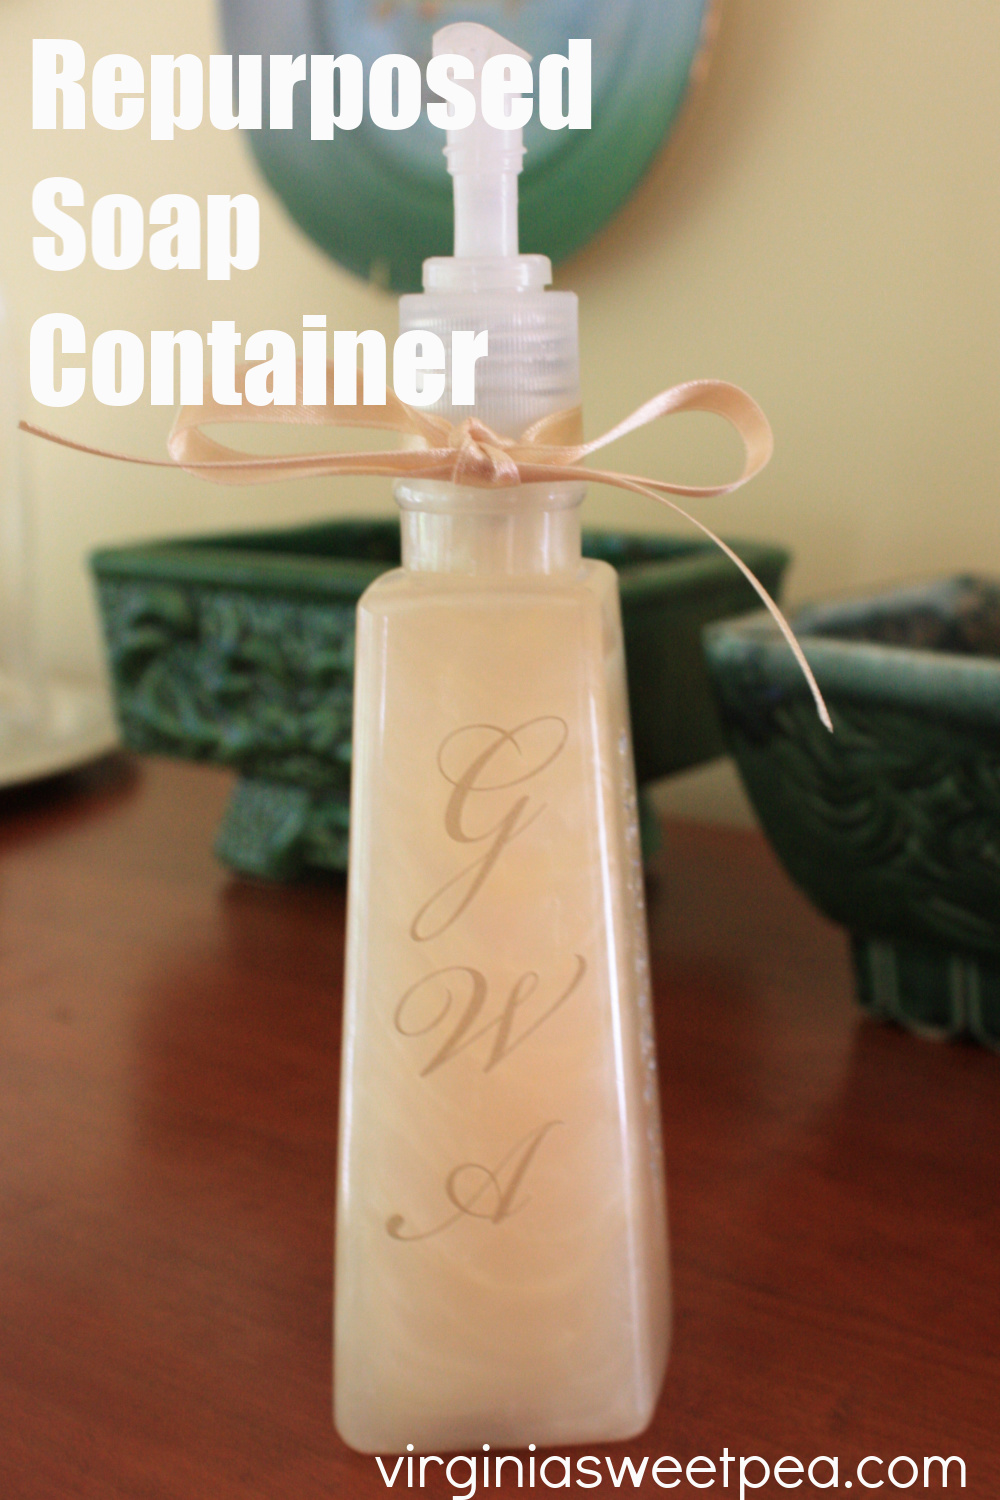 Repurposed Soap Container embellished with rub-on initials and a ribbon